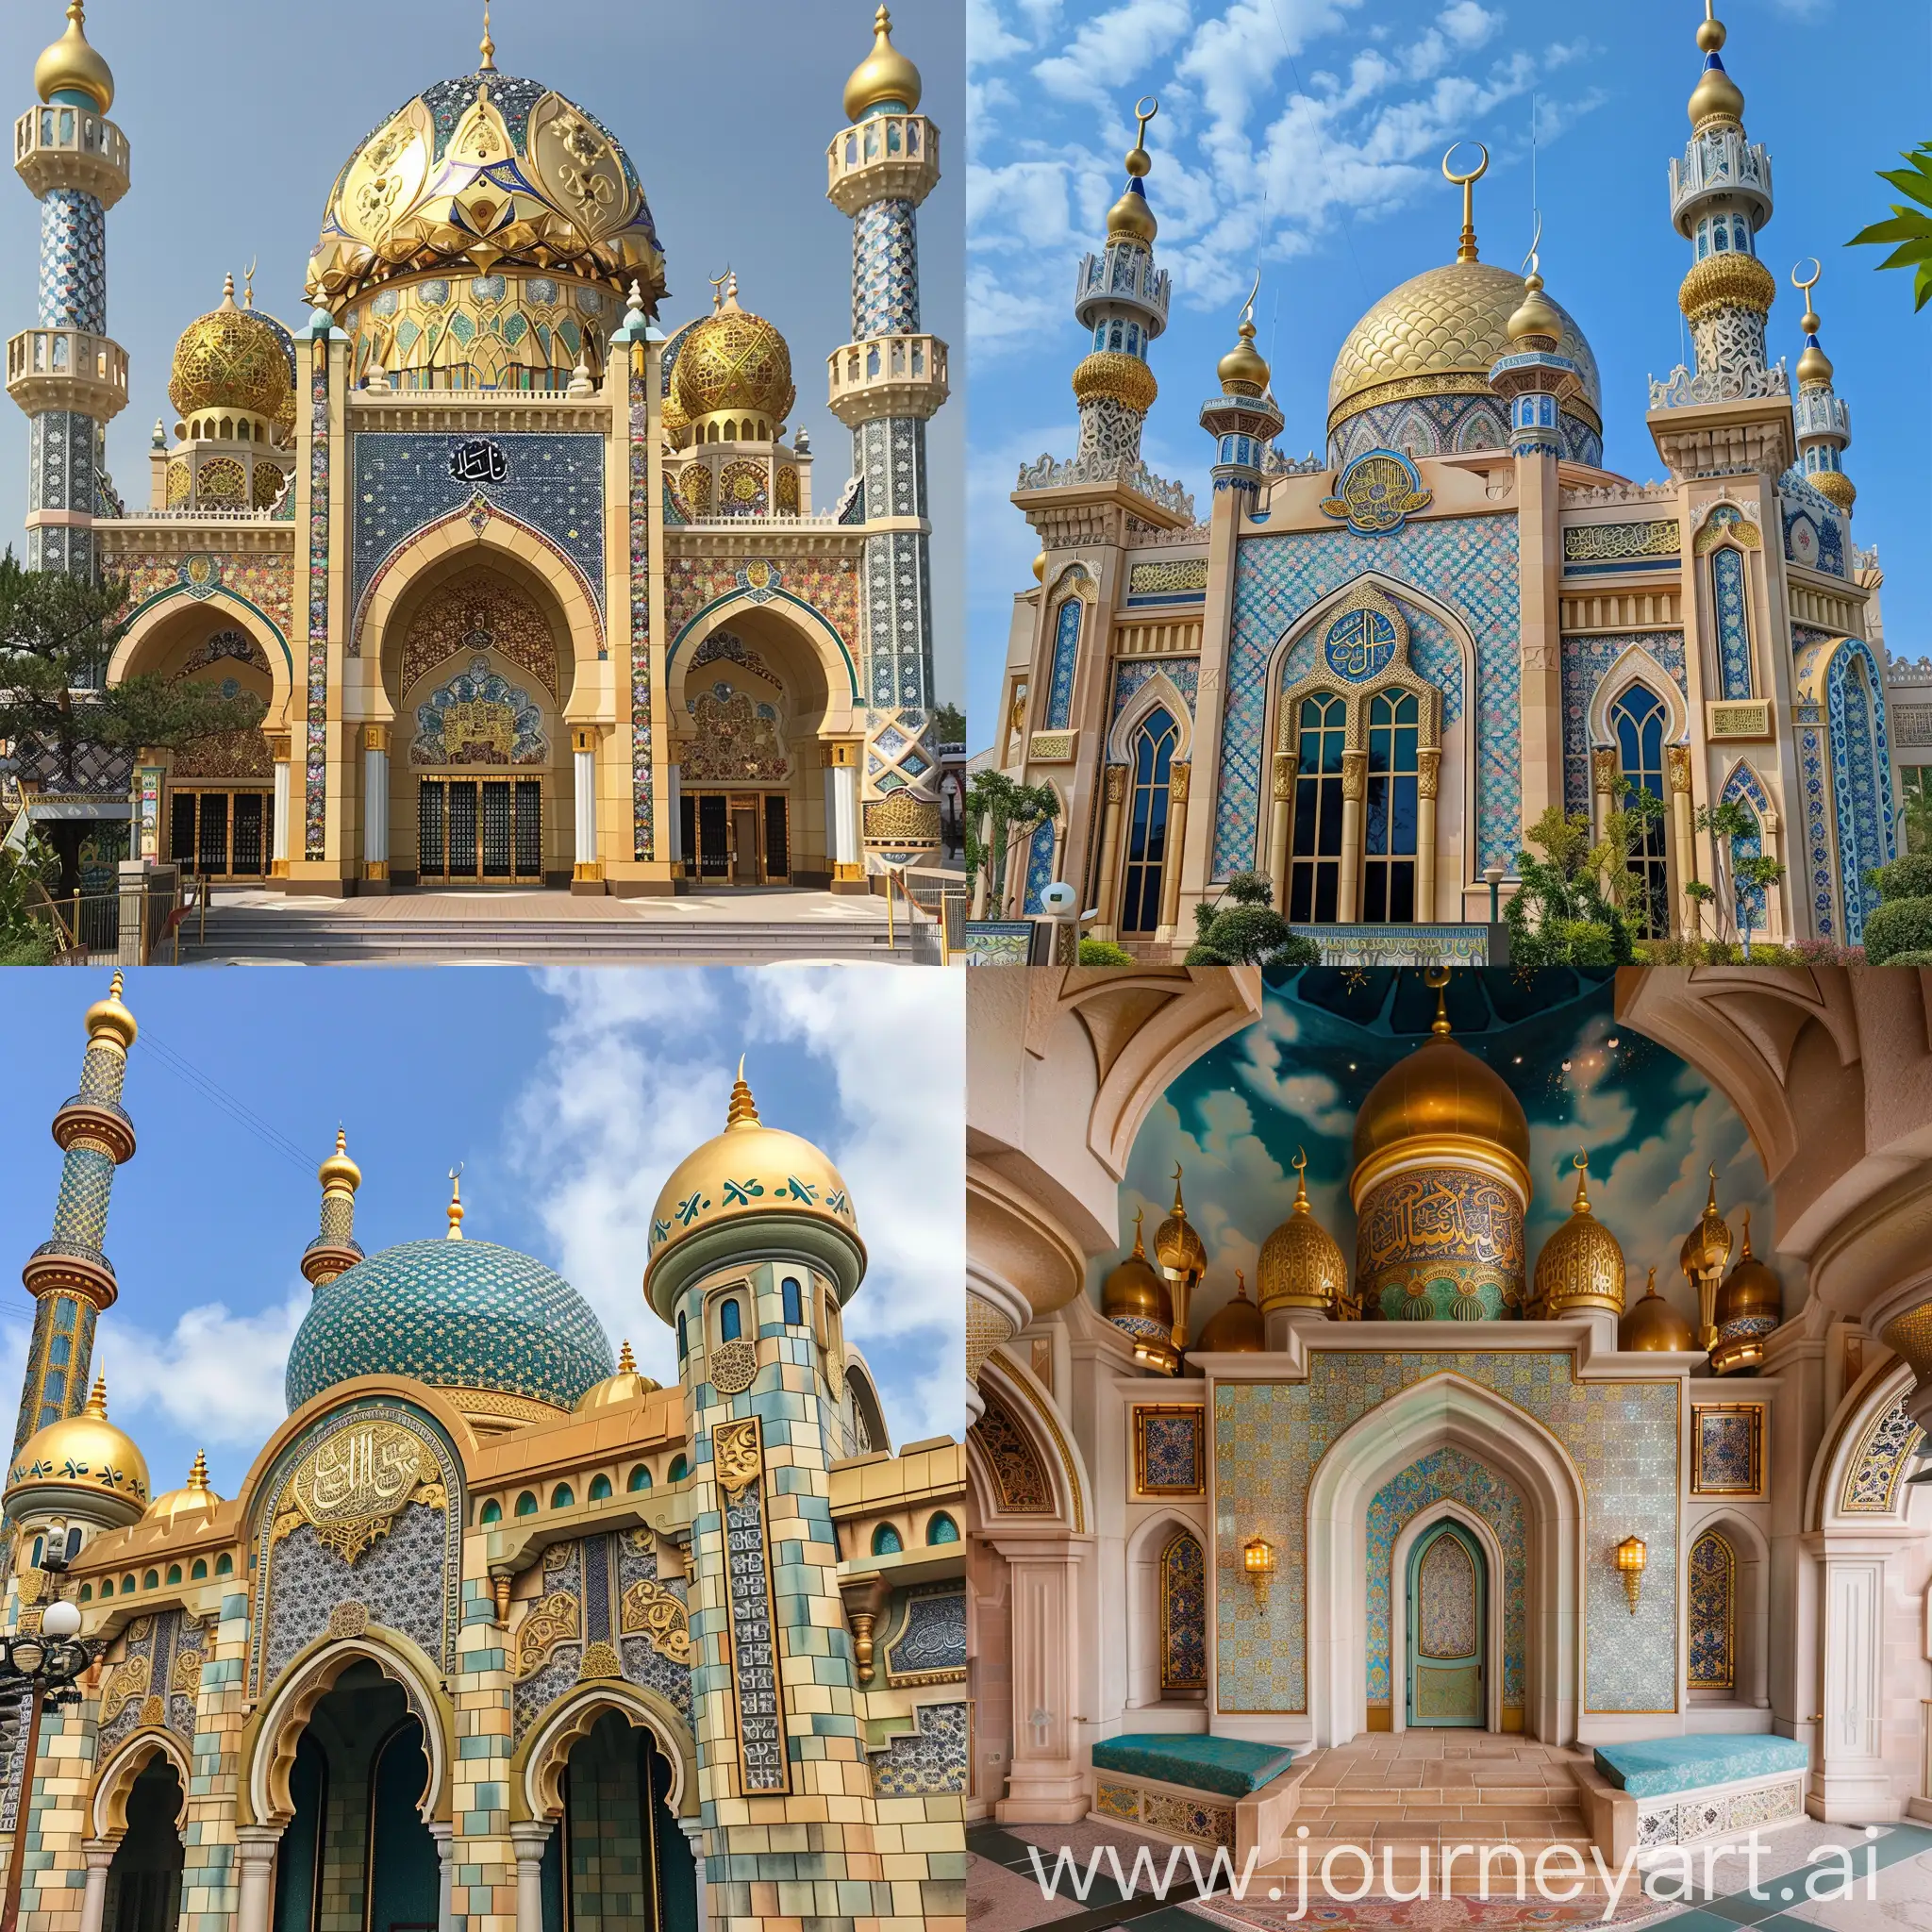 a mosque with golden ornaments and Persian tiles at Tokyo Disney sea theme park